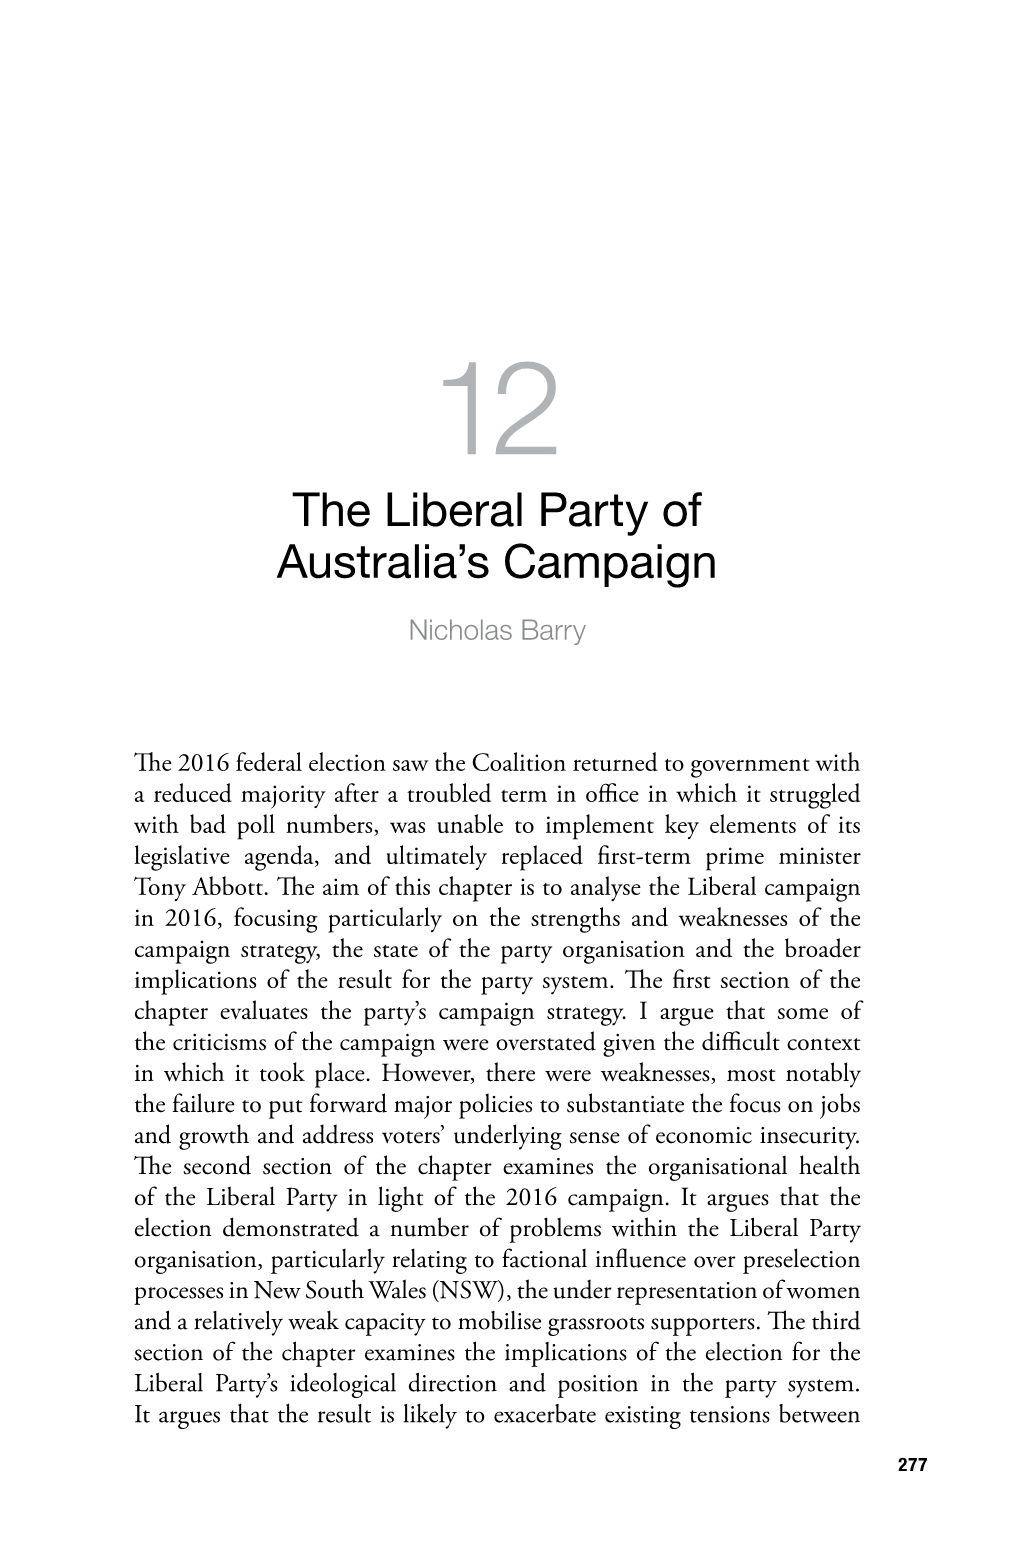 The Liberal Party of Australia's Campaign